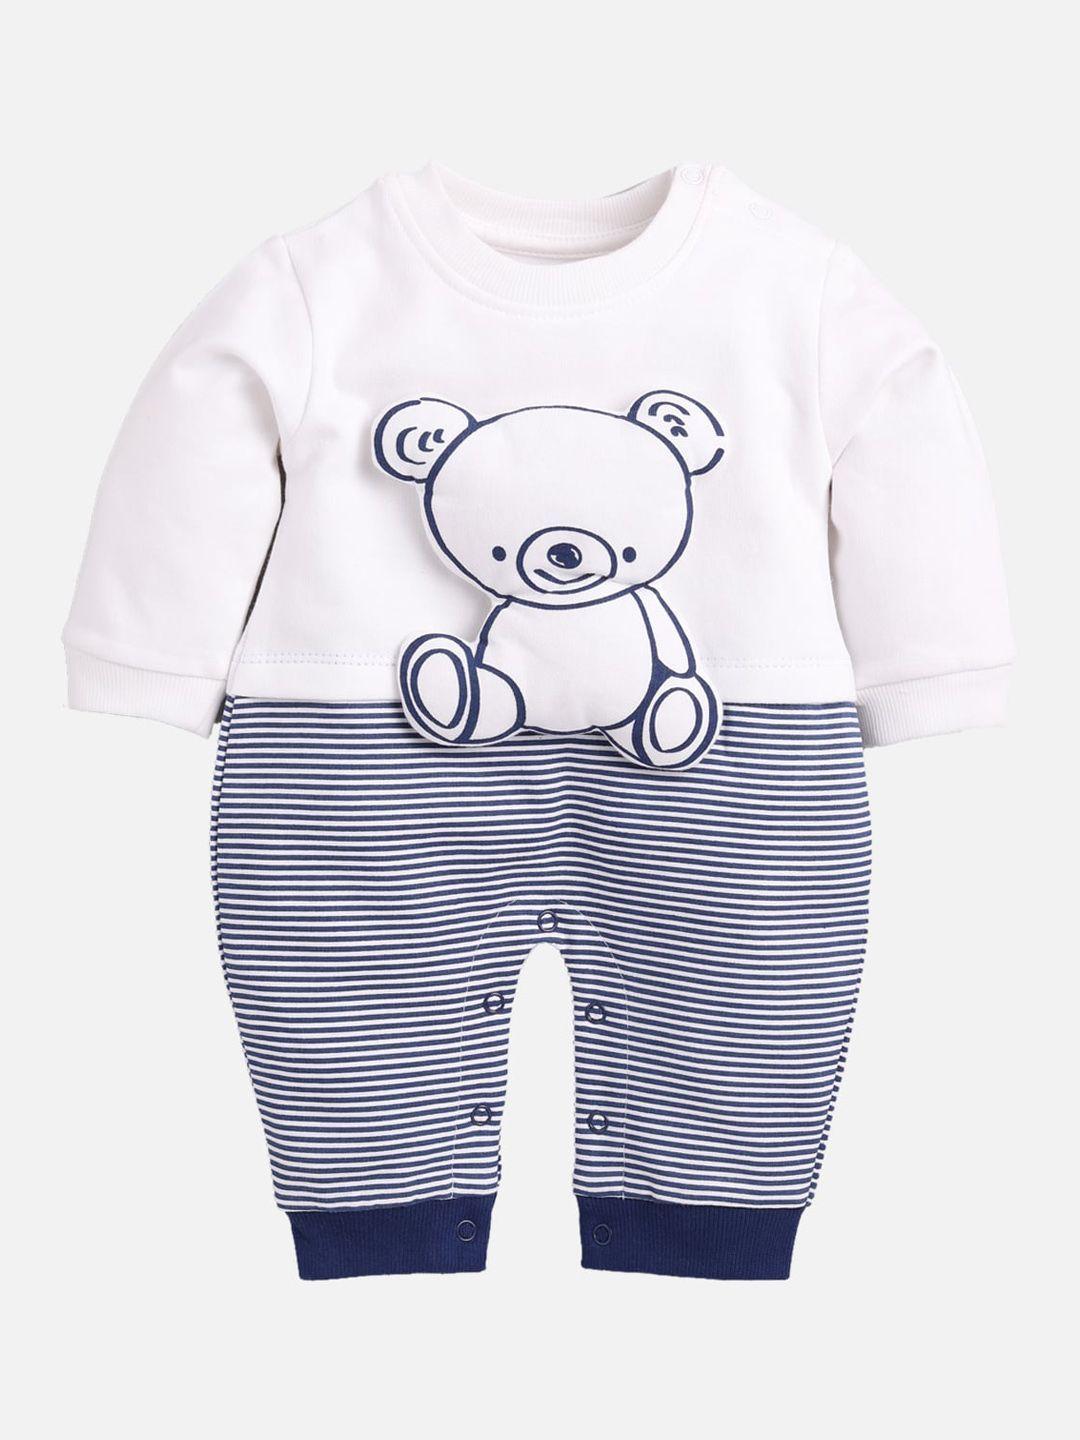 baby-go-boys-navy-blue-&-white-organic-cotton-printed-rompers